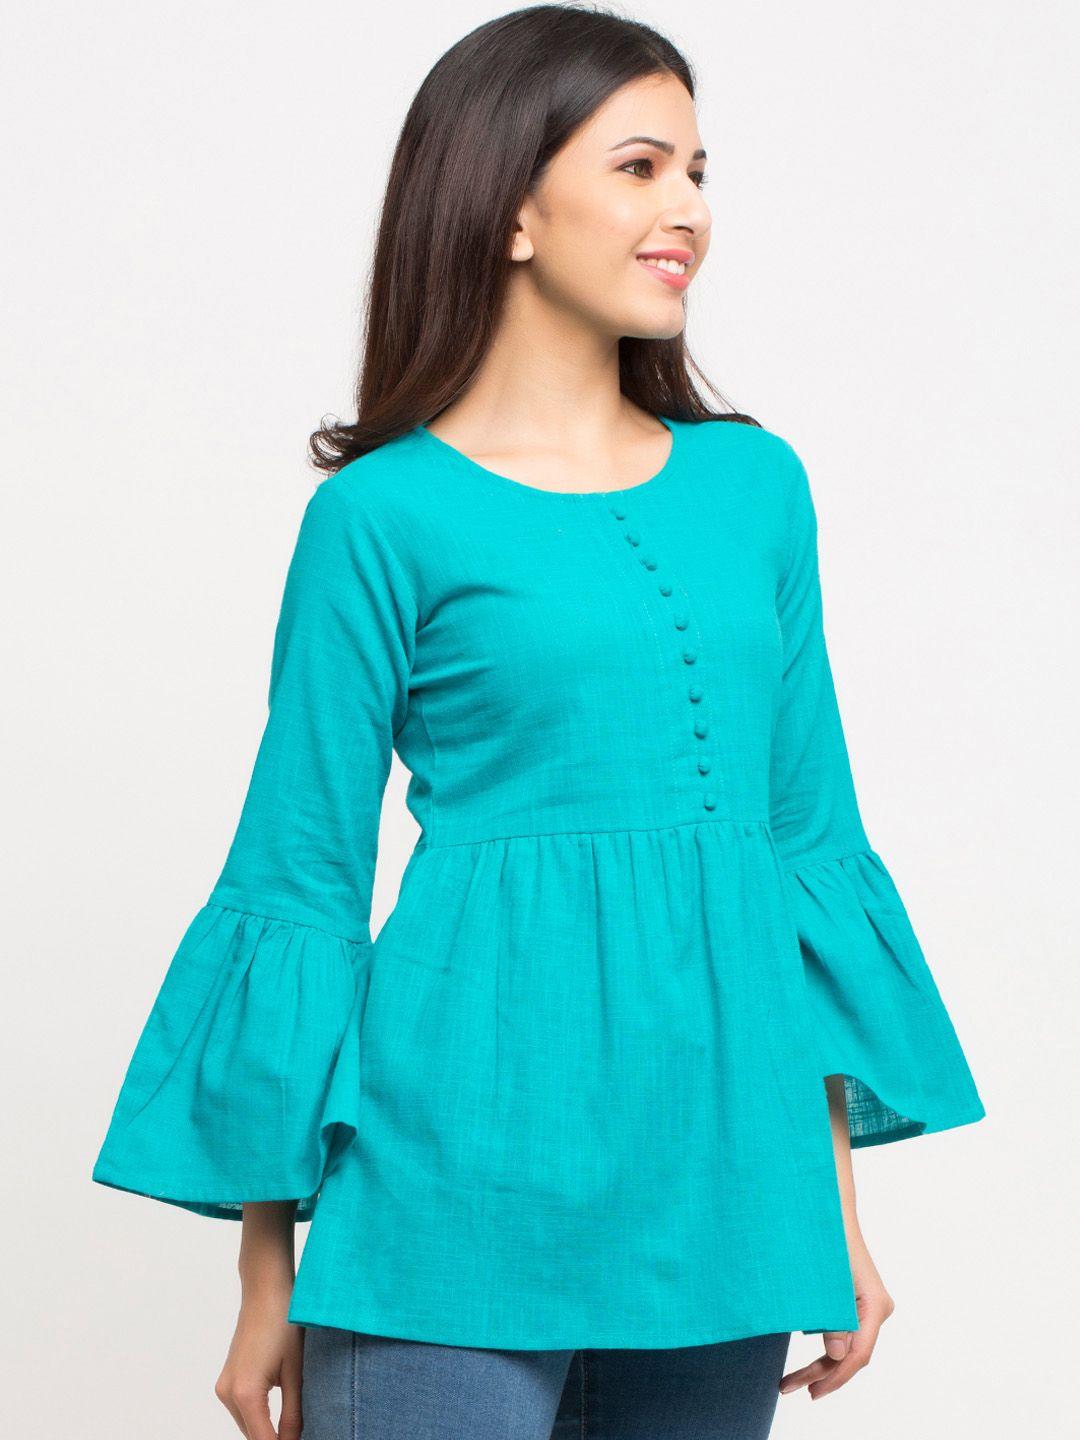 YASH GALLERY Women Teal Solid A-Line Top